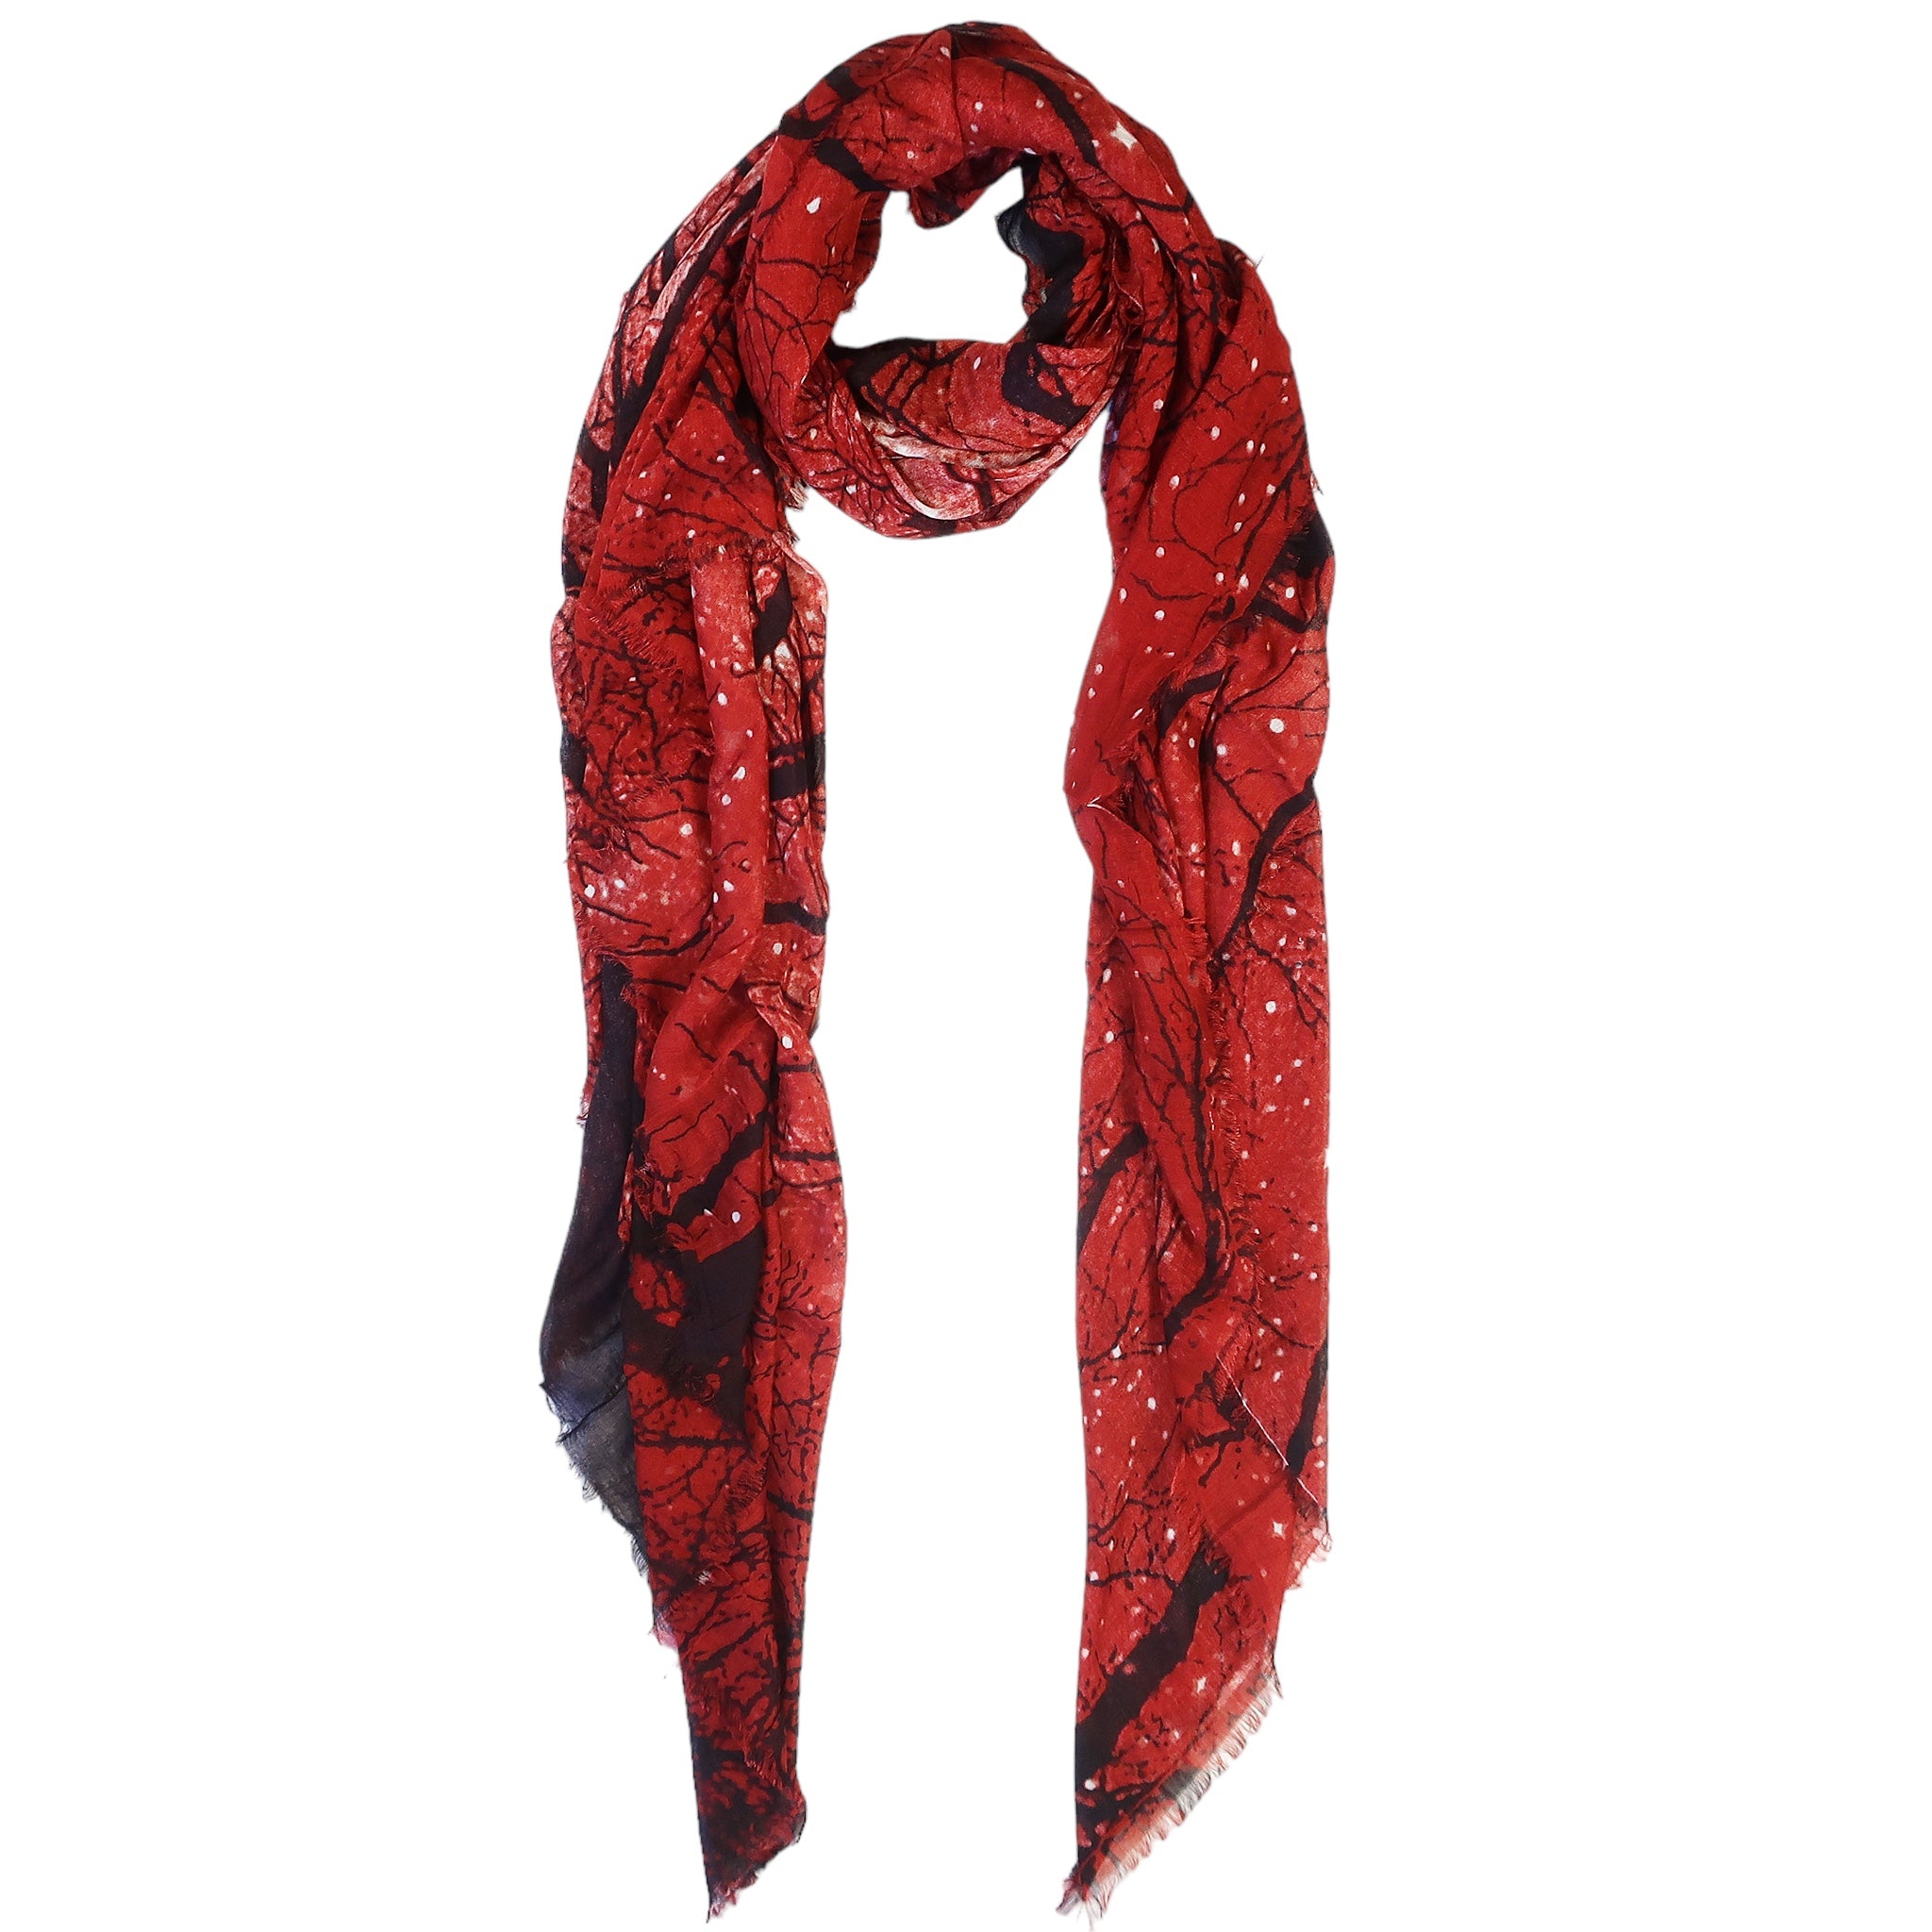 Blue Pacific Cashmere and Silk Sky and Tree Print Scarf in Marsala Red